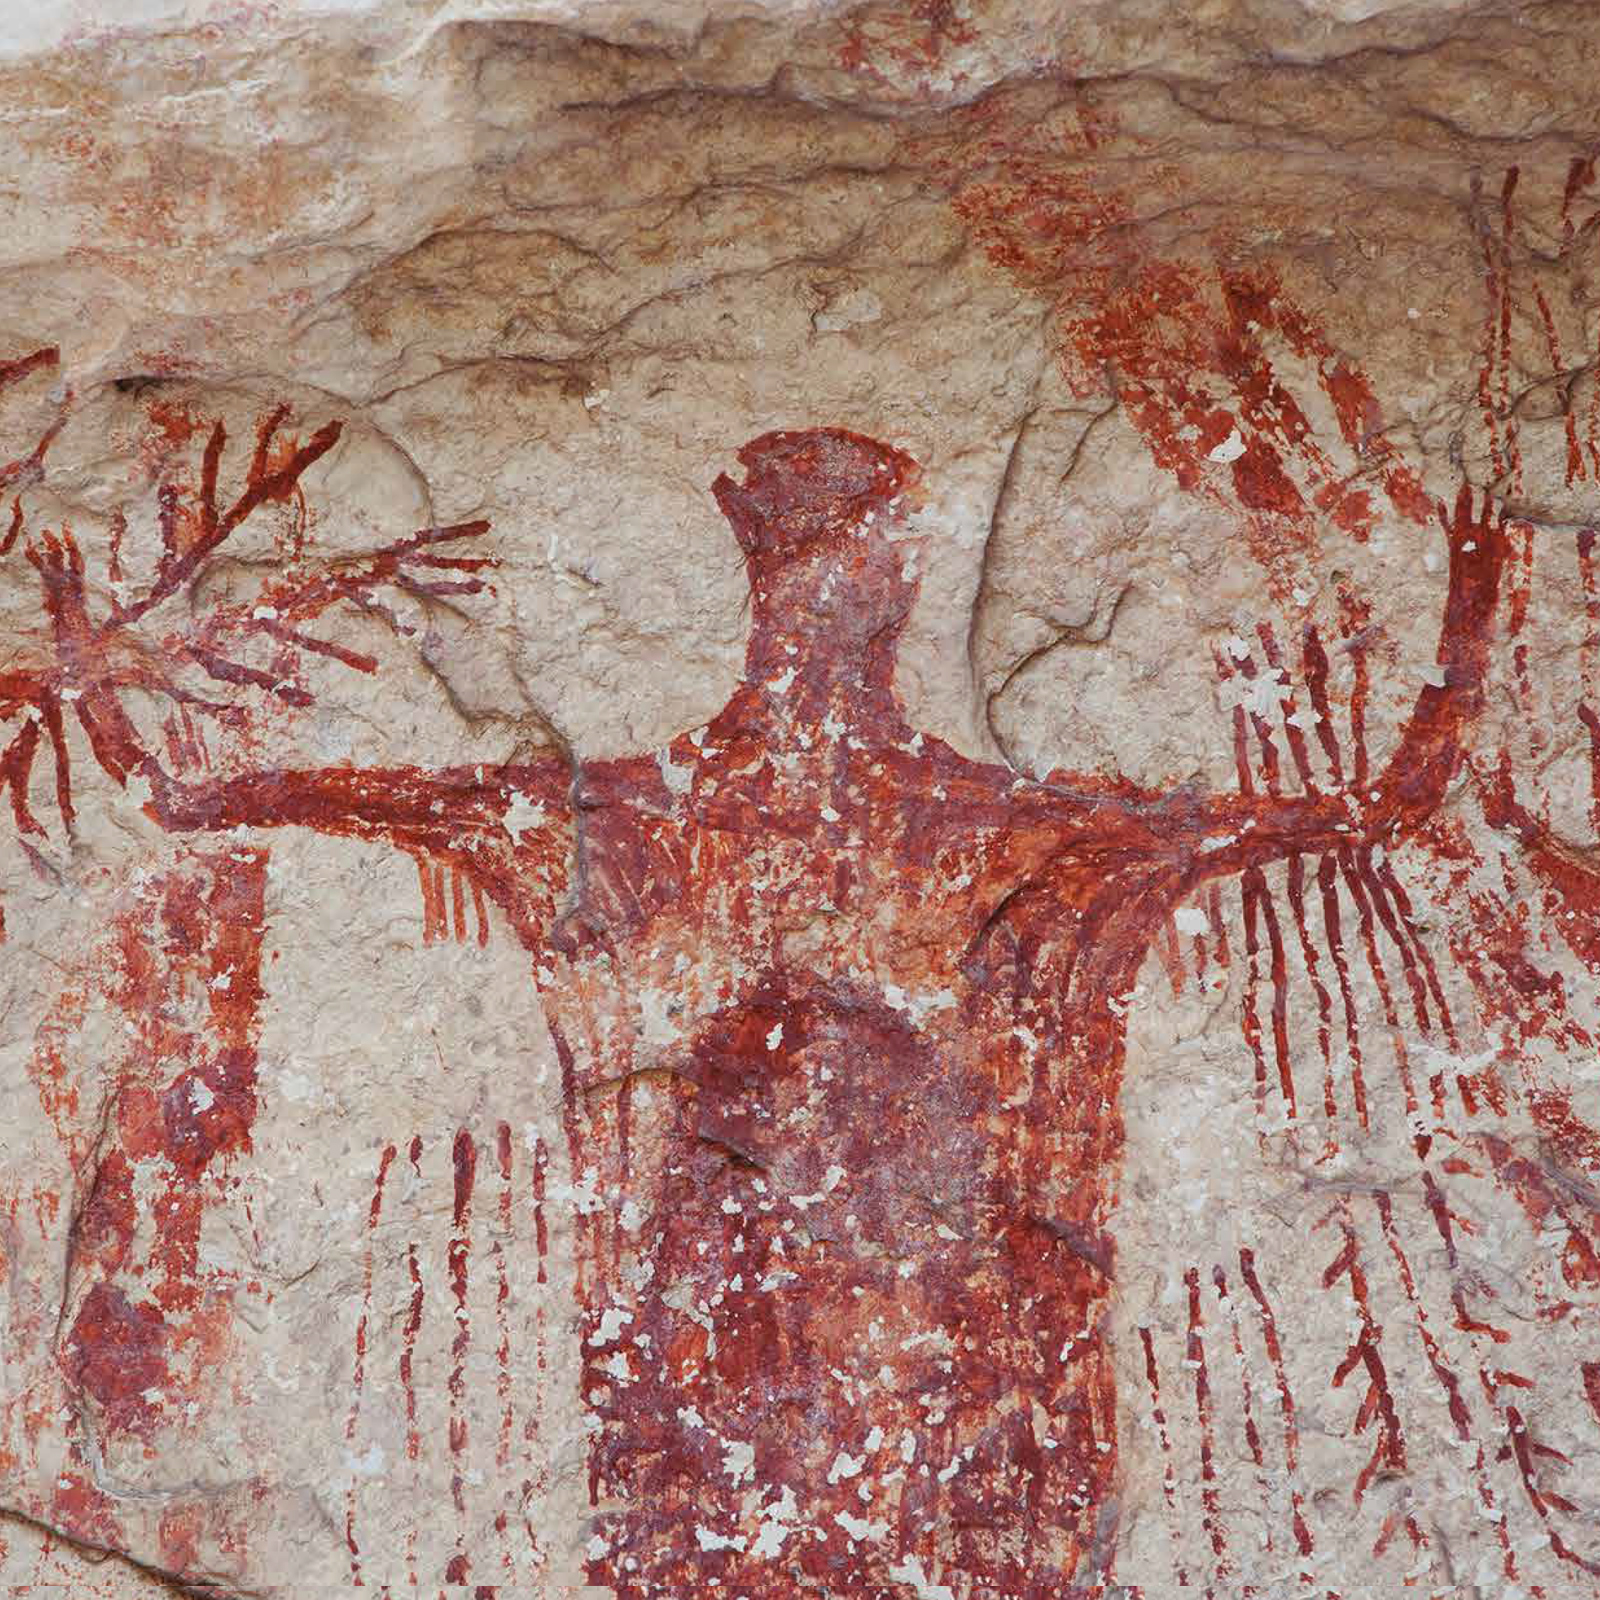 This powerful, red anthropomorph from Panther Cave displays a wide range of body adornments, paraphernalia, and weaponry